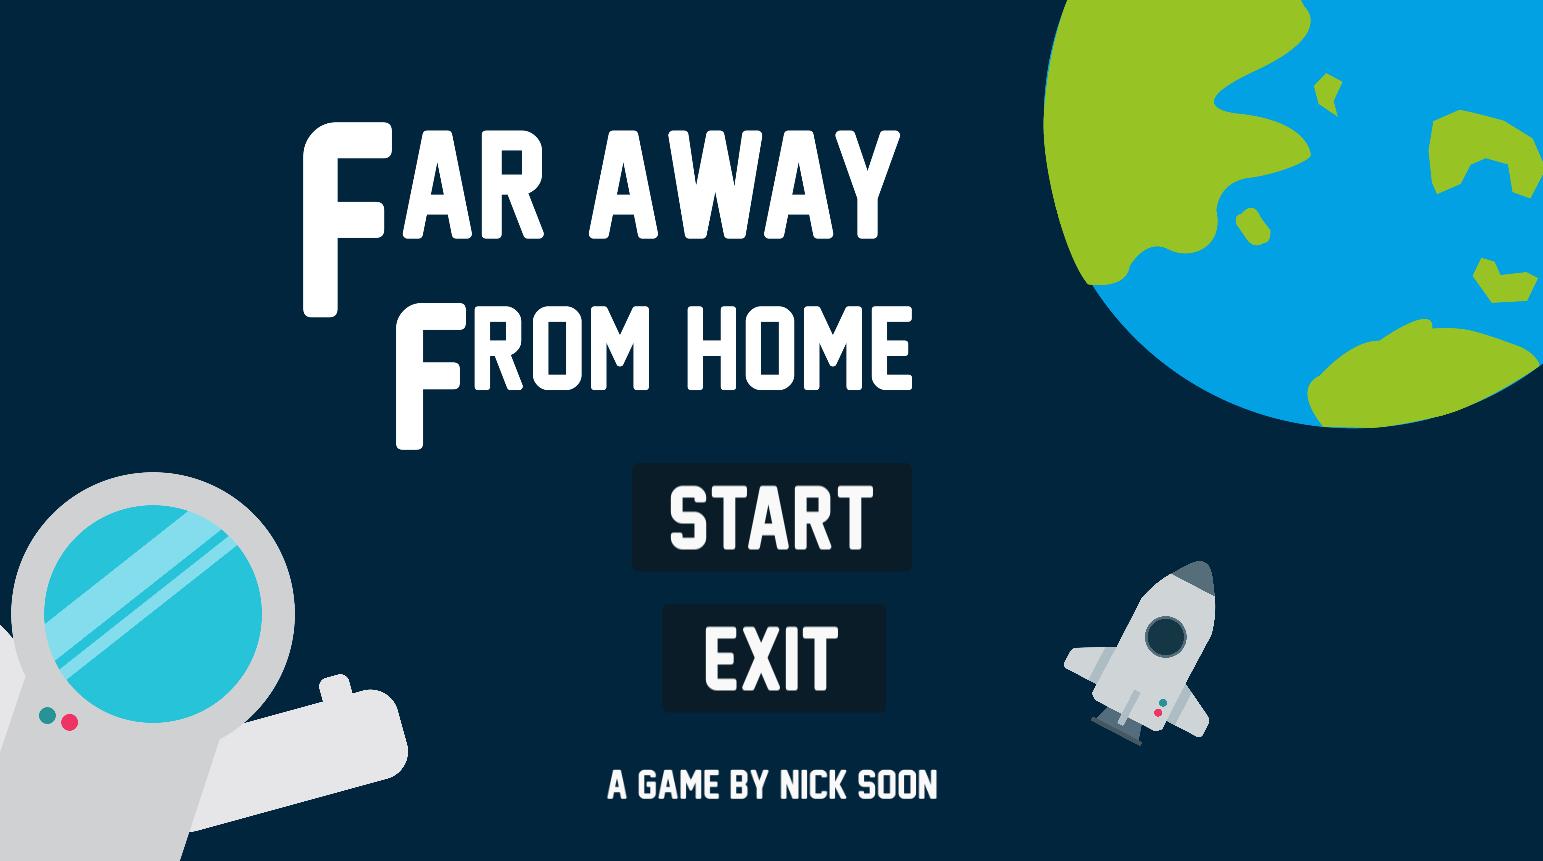 Far away from Home игра. Away from Home. Away from Home APK. Away from home 2